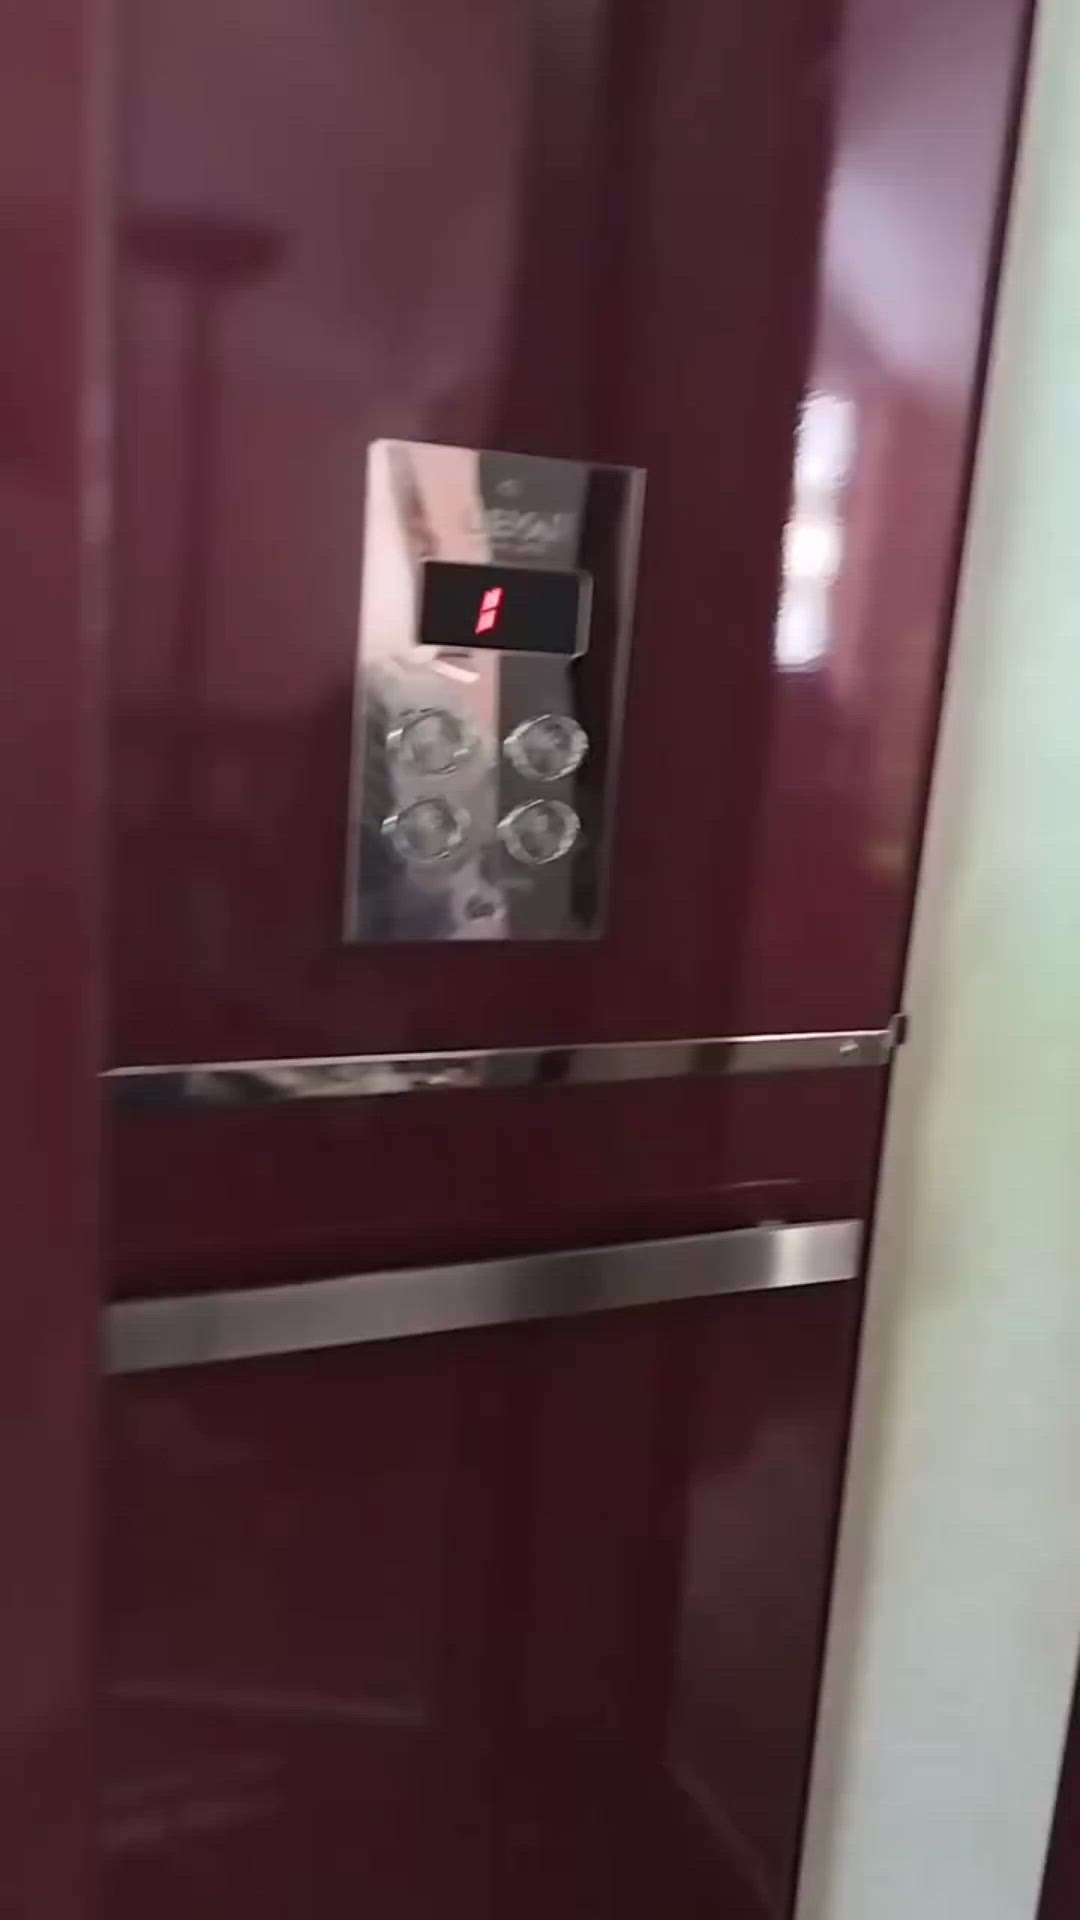 #creatorsofkolo #lift #premium #oldage #resale #elevators #homeelevators #lifts #HouseDesigns #budgetlifts
its just an introduction to installing elevators at home